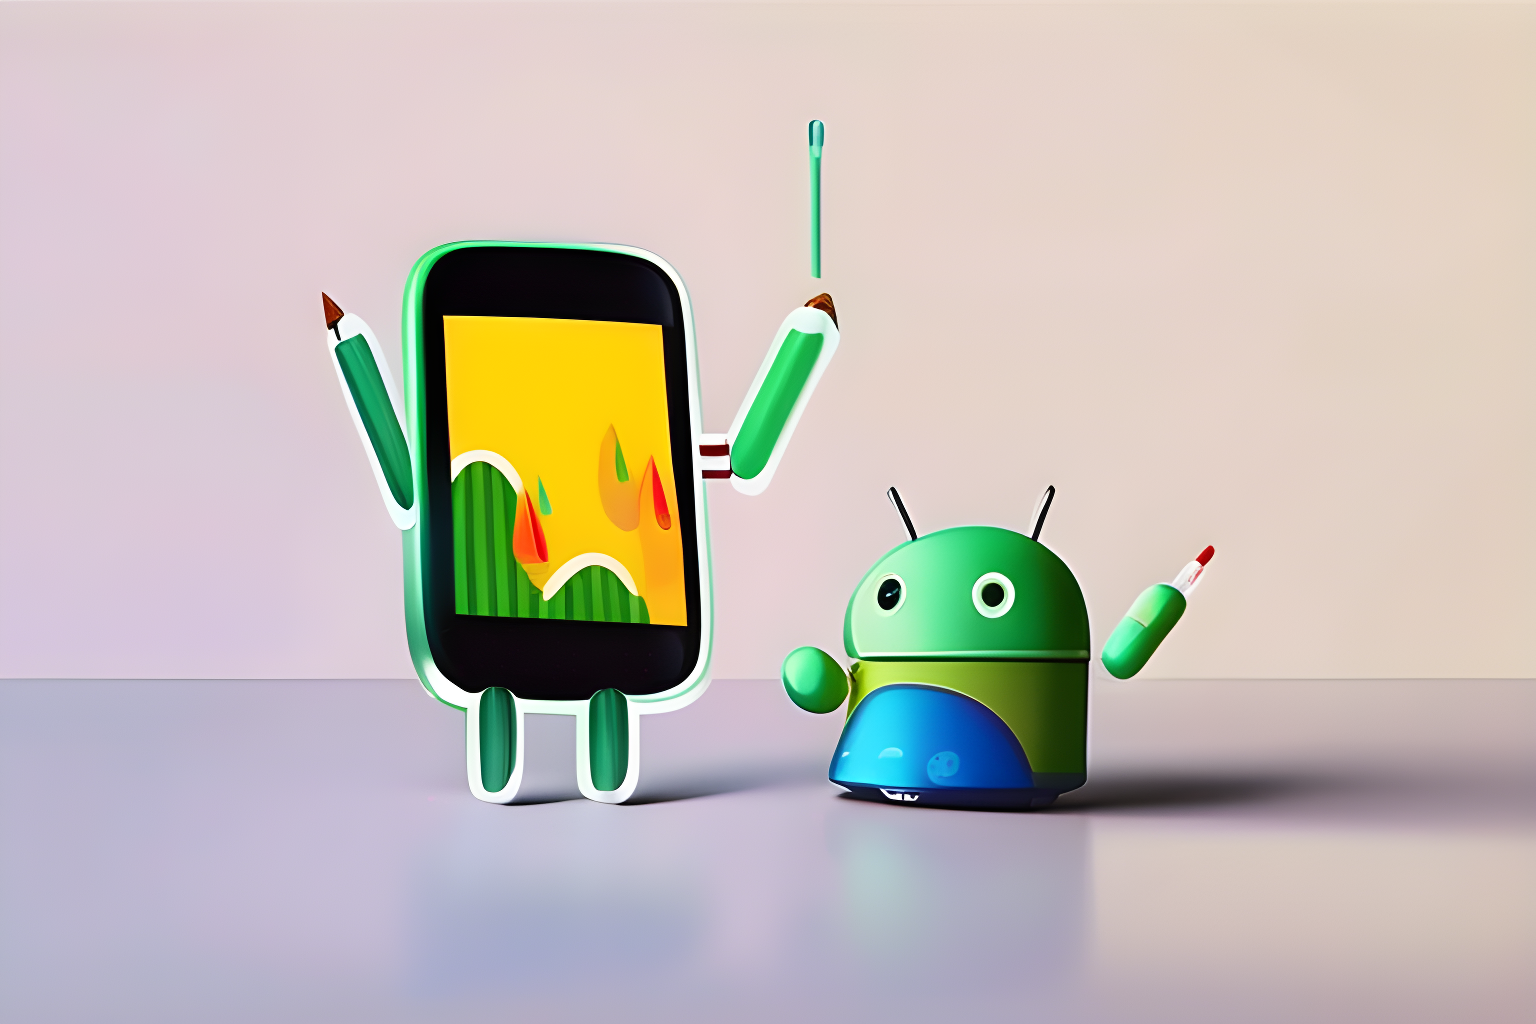 Google Android mascot is drawing on mobile phone screen